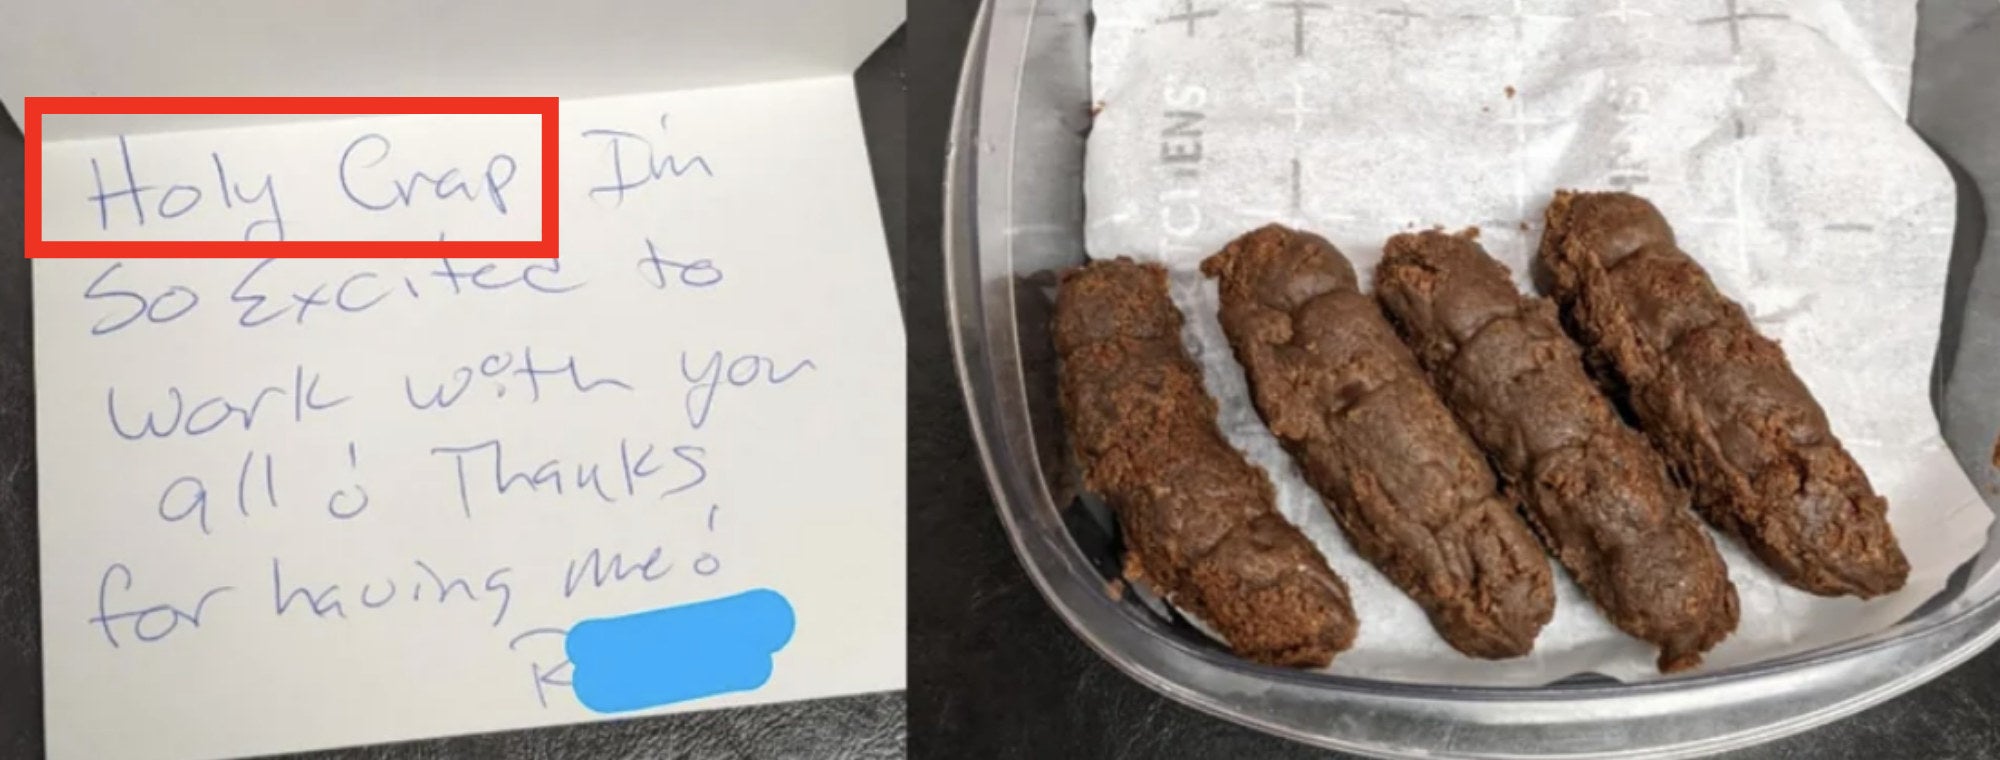 Four turd-looking brownies with handwritten note: &quot;Holy crap, I&#x27;m so excited to work with you all! Thanks for having me!&quot;